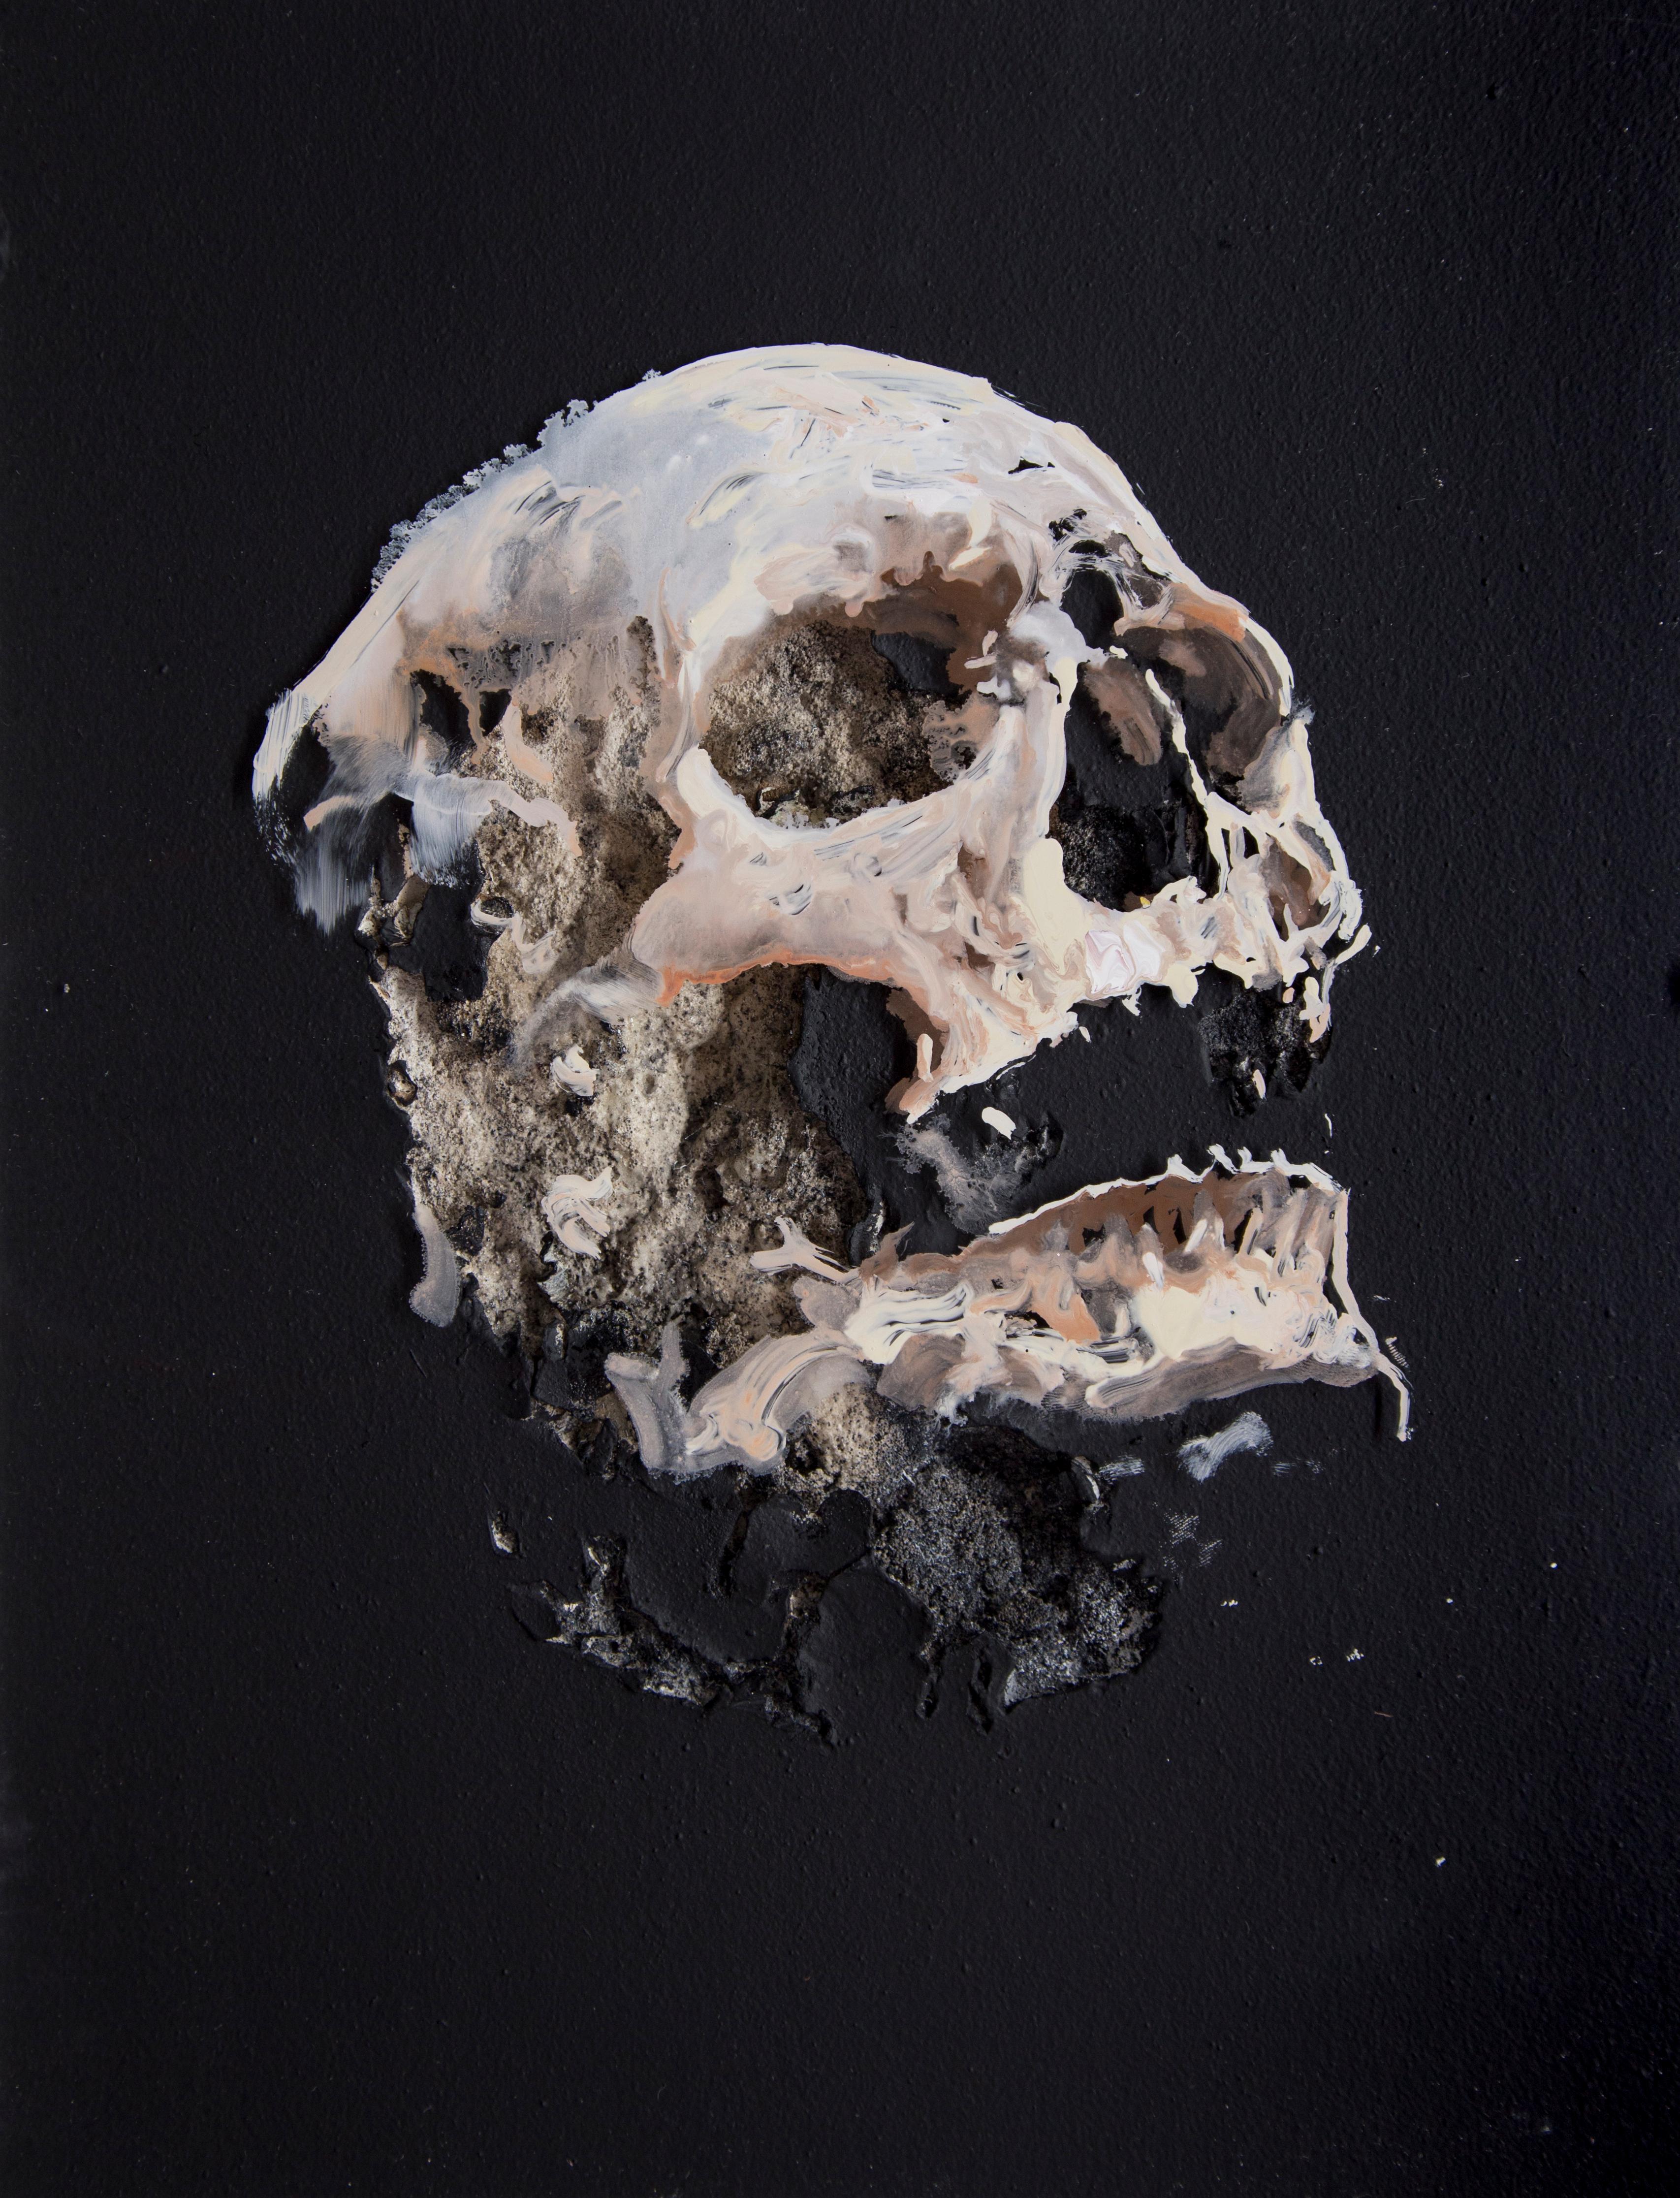 Juan Miguel Palacios Figurative Painting - 3D Painting of Skull: 'Wound Black Wound I'